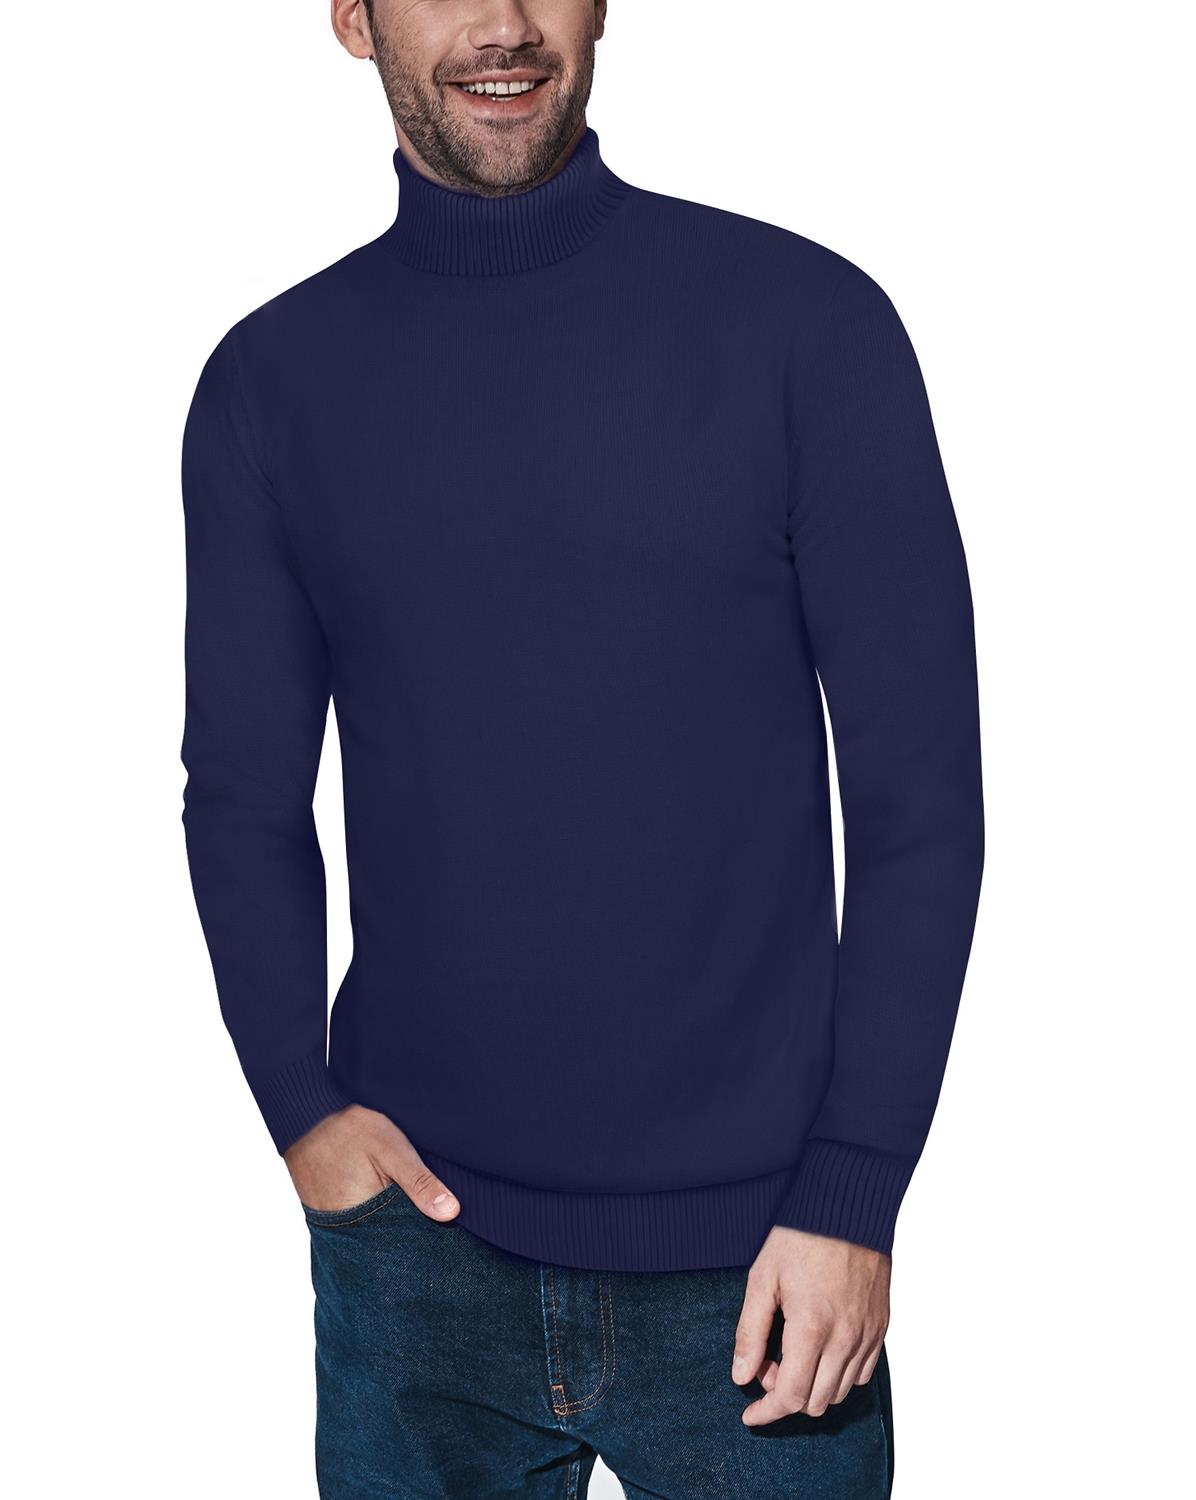 X-ray Turtleneck Sweater In Navy